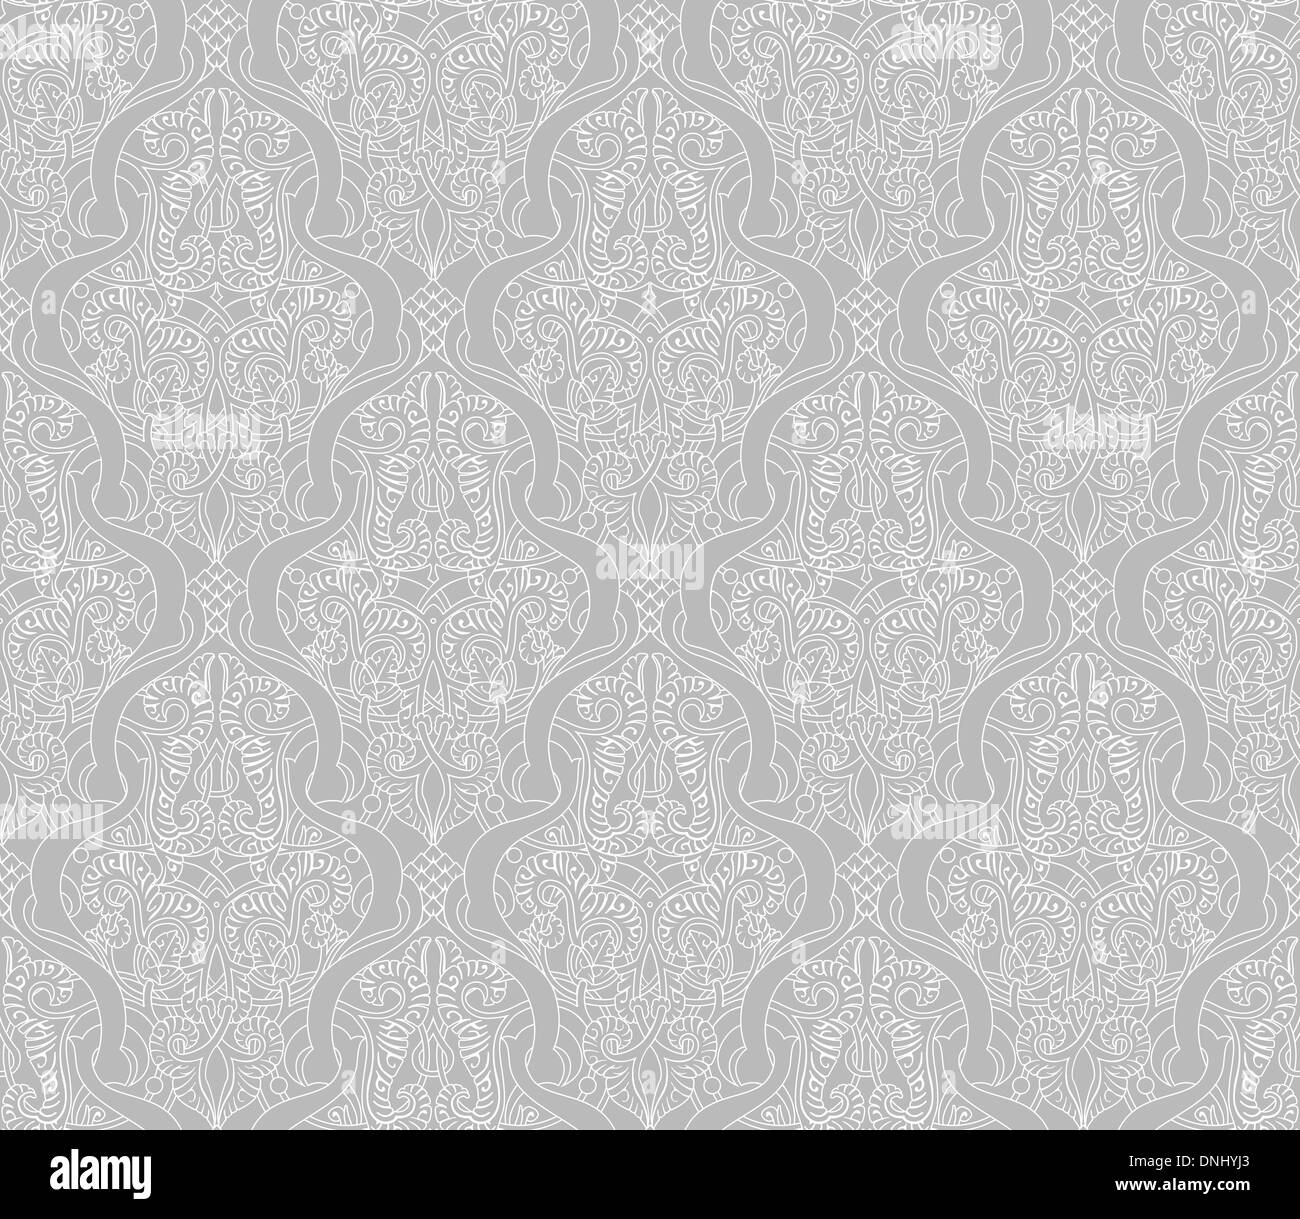 Illustration of an intricate seamlessly tilable repeating vintage Islamic motif pattern Stock Photo